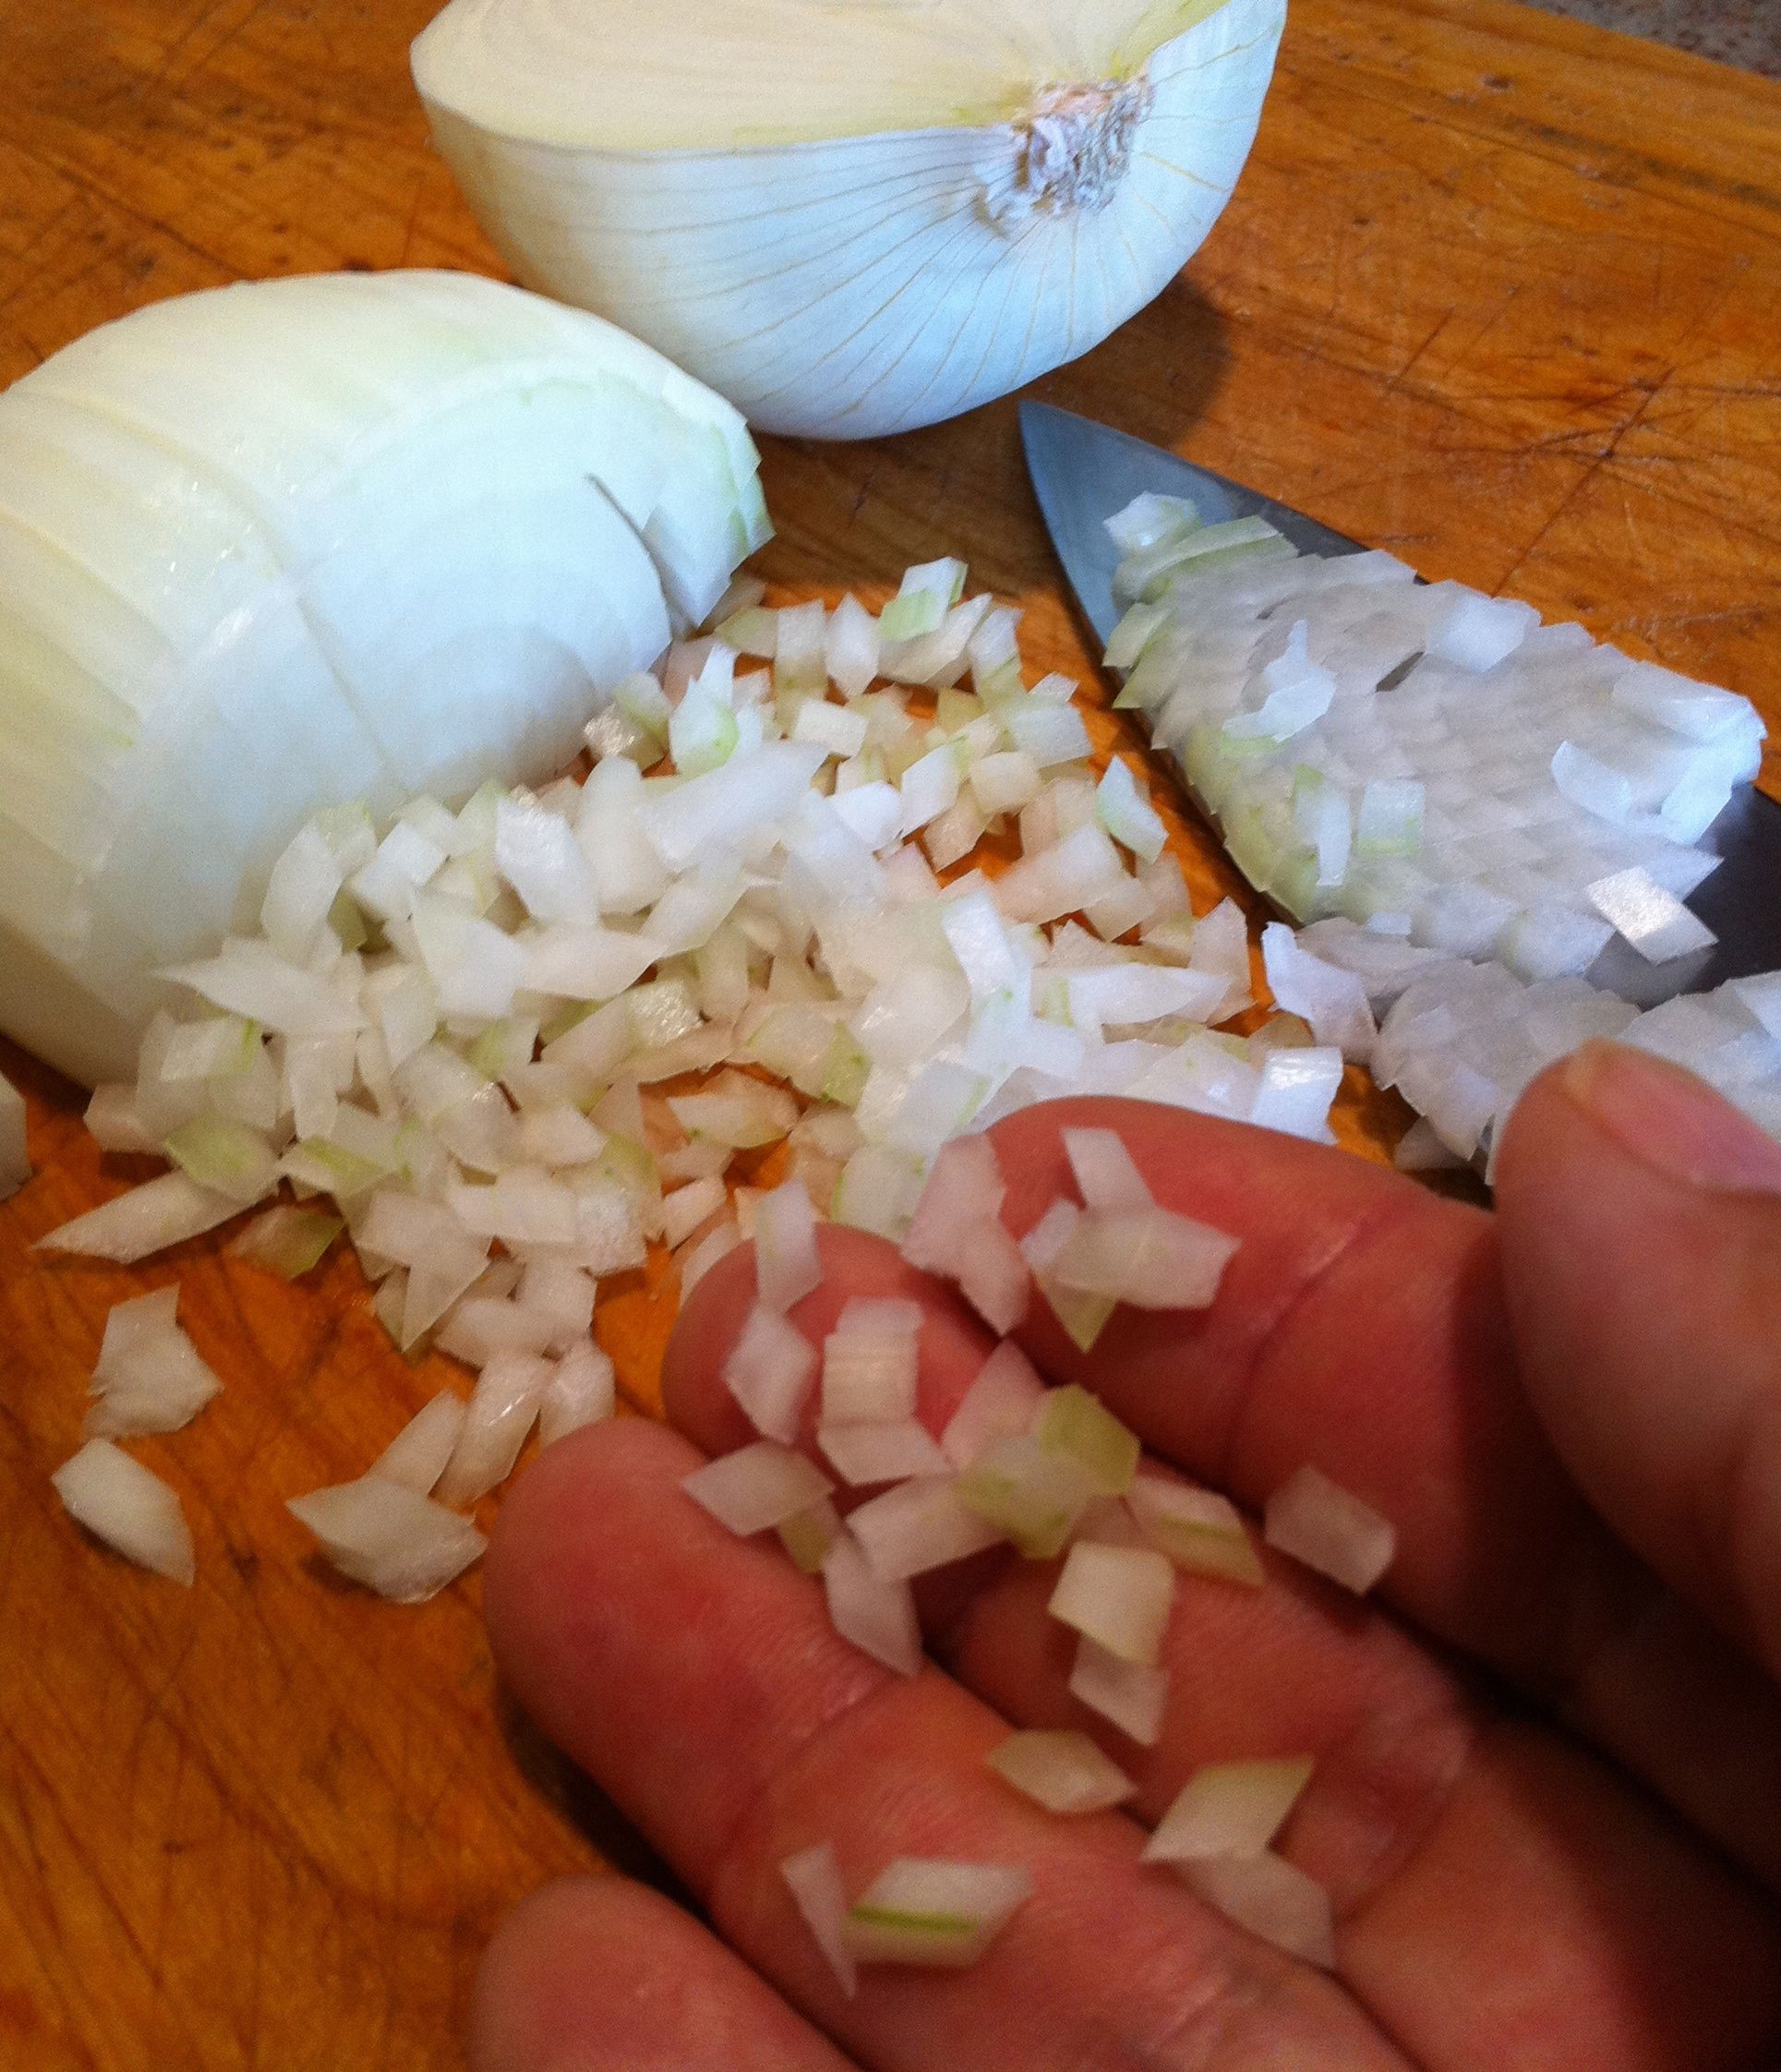 Diced onions are small, to create an acidic contrast to the chile of the enchilada